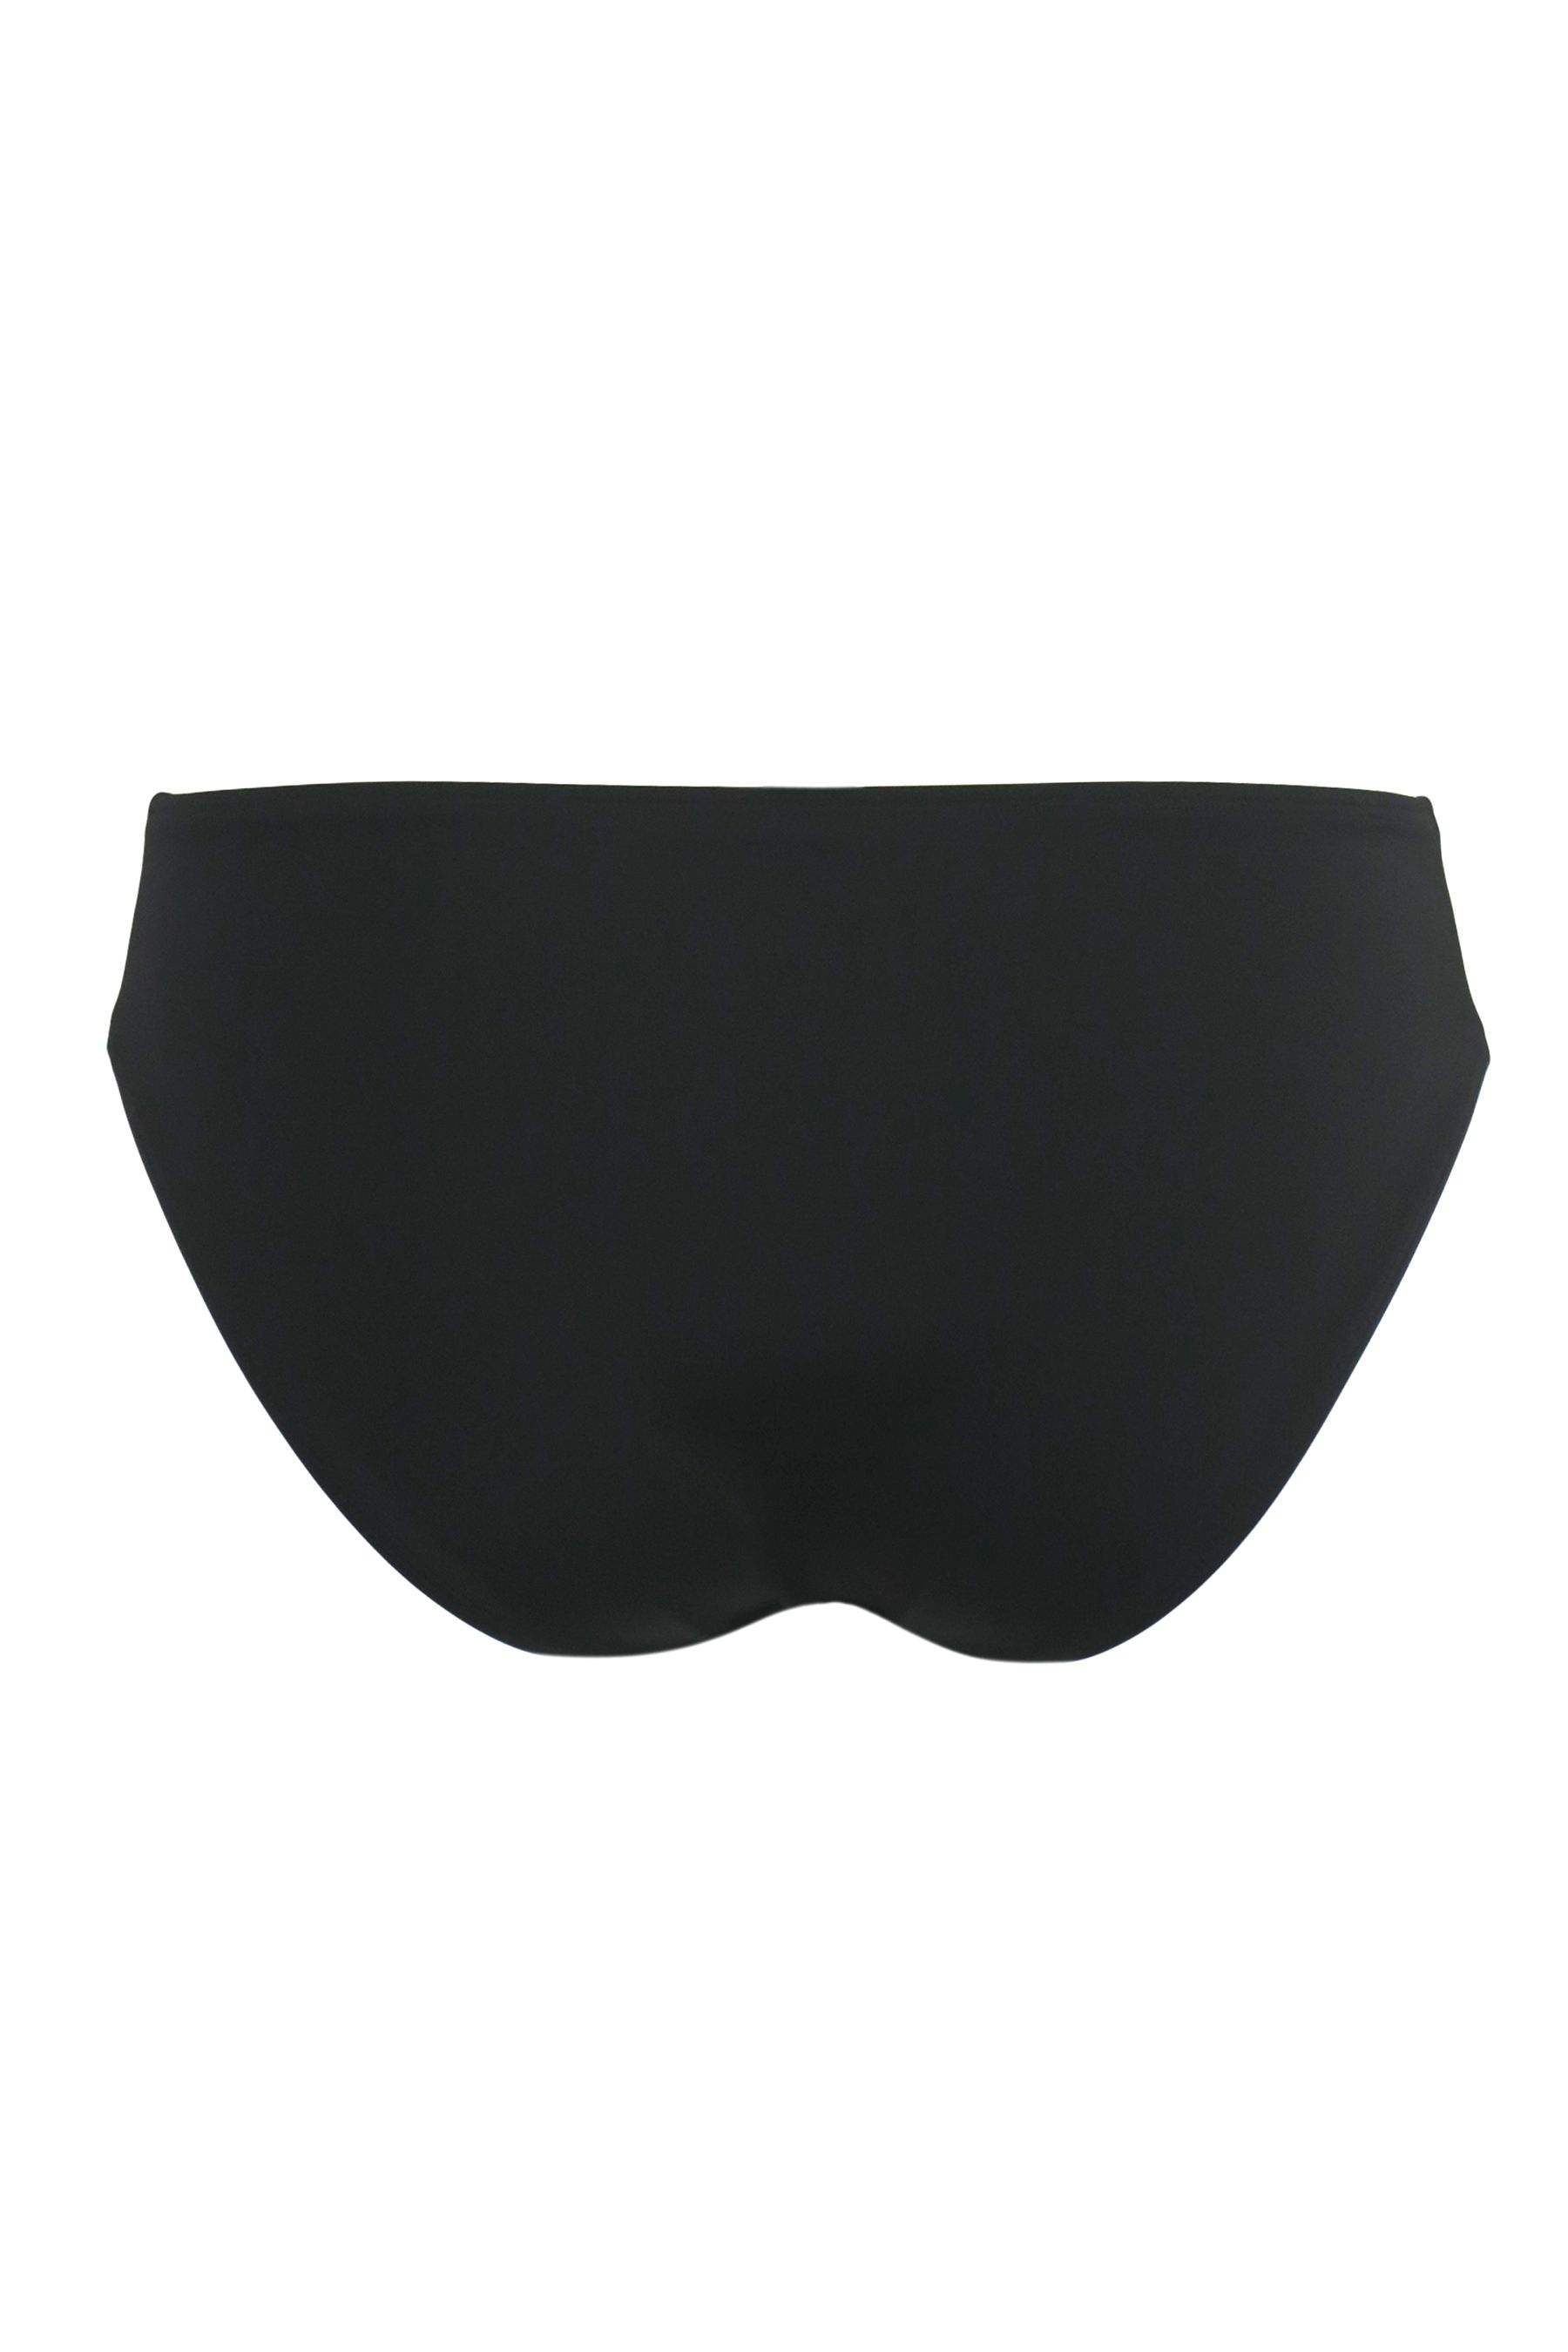 Buy Pour Moi Black Brief Madrid Bikini Bottoms from the Next UK online shop